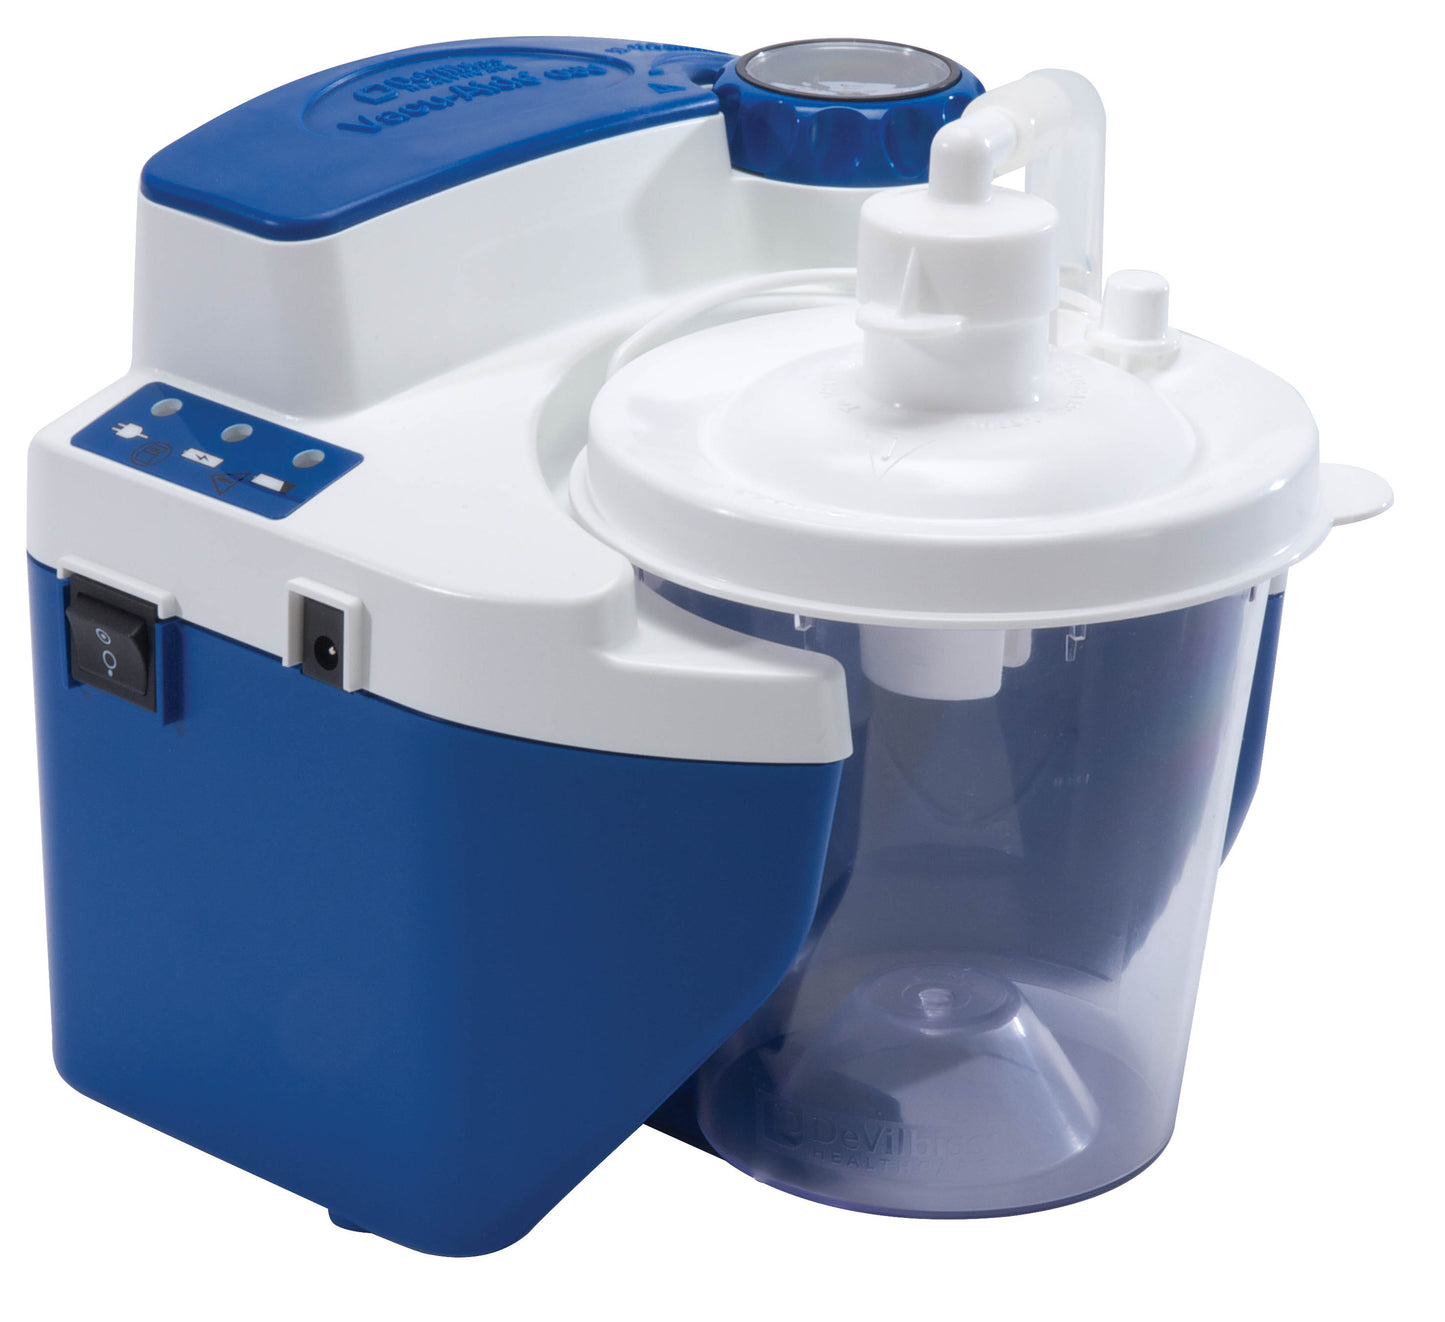 Vacu-Aide QSU Quiet Suction Unit with External Filter, Battery, and Carrying Case